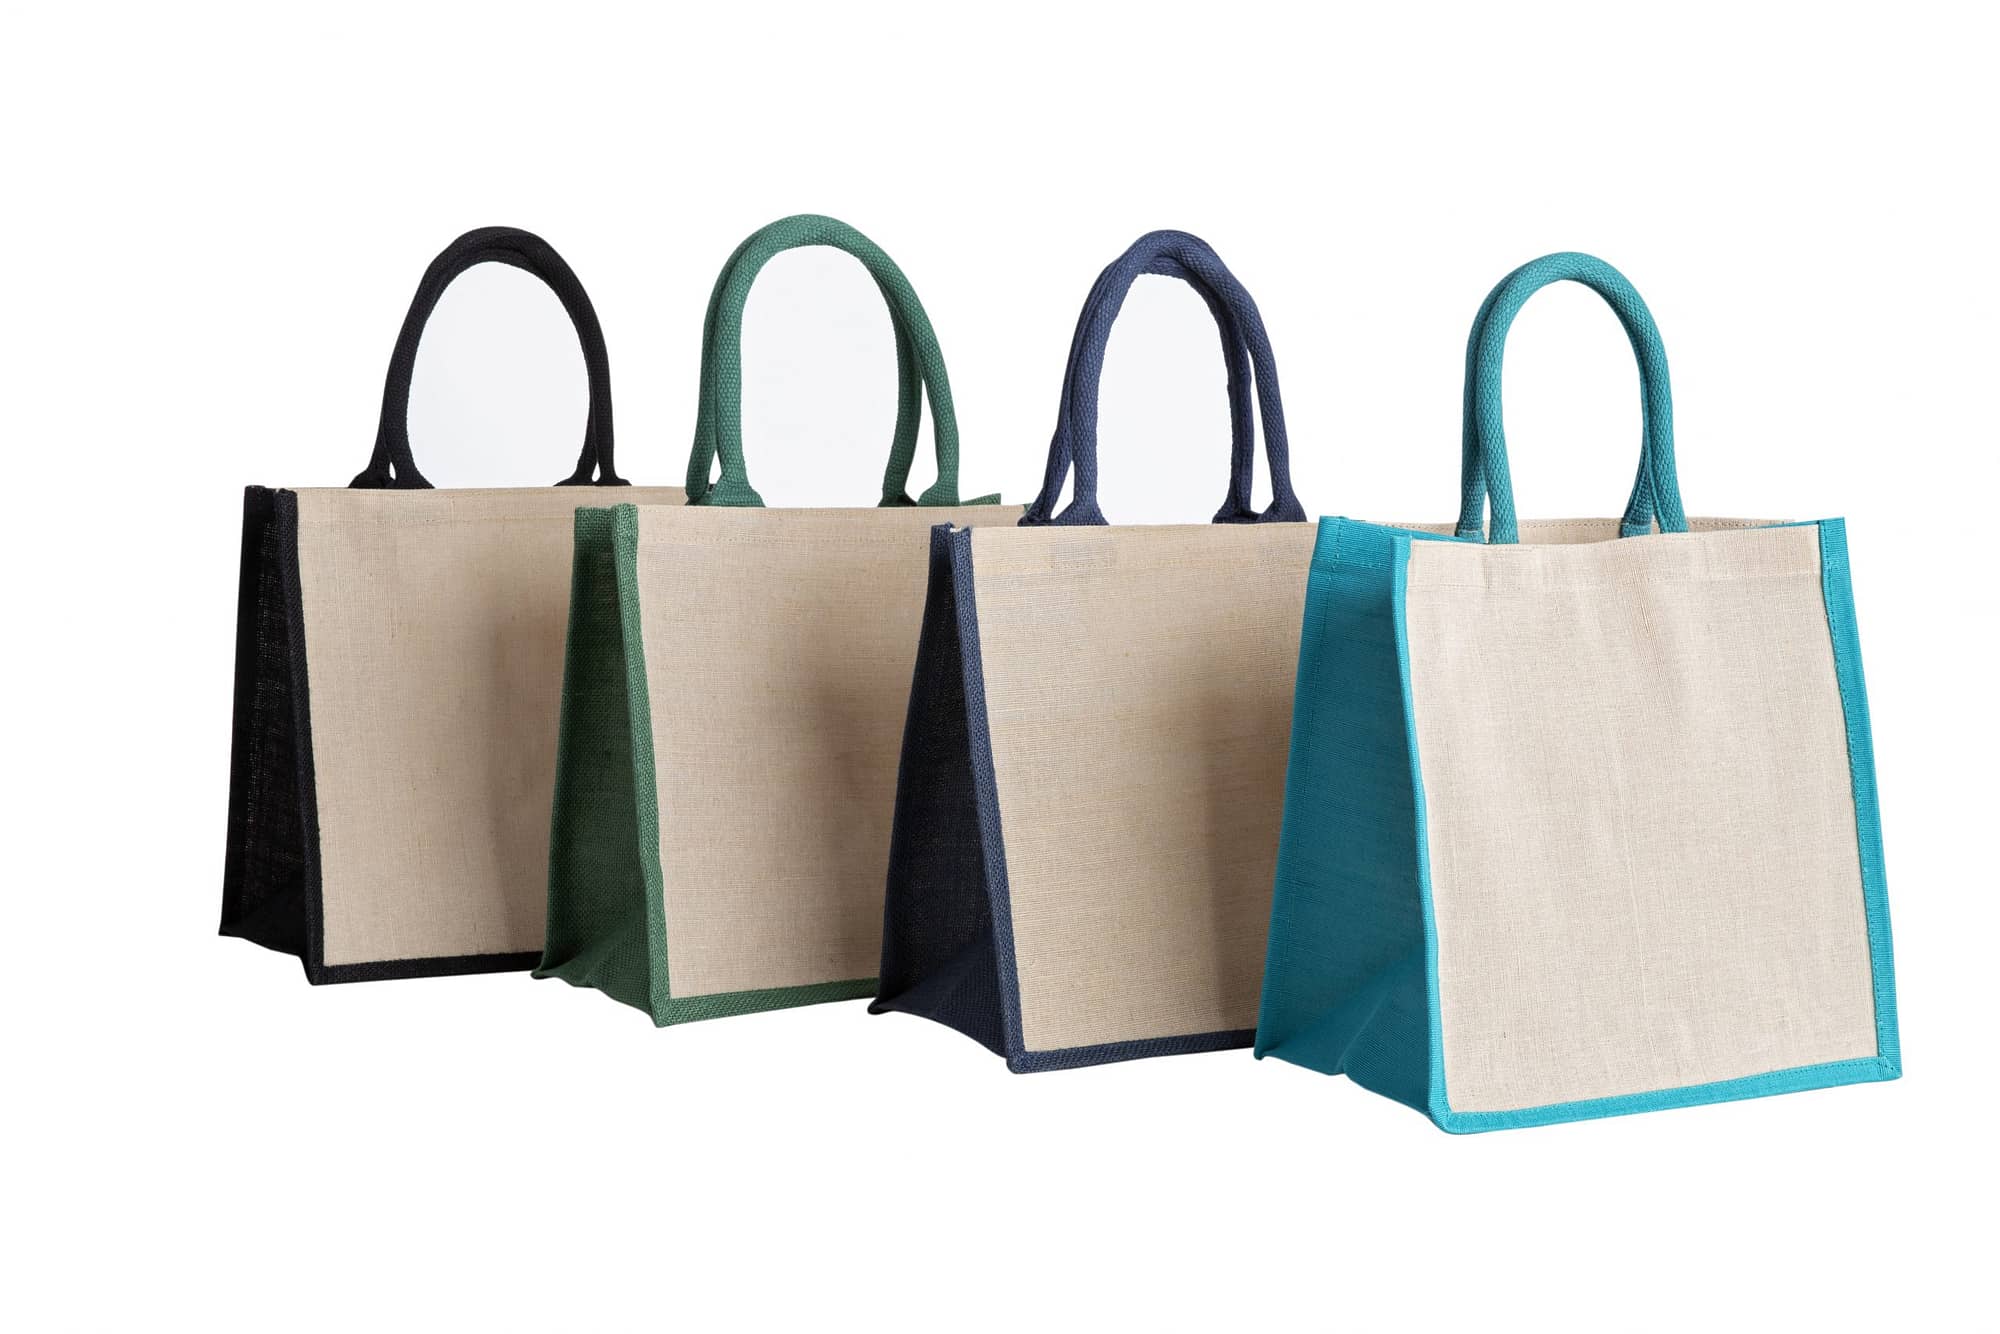 Bosmere Bosmere Brand Reuseable Grocery Shopping Bags Recycled Plastic 